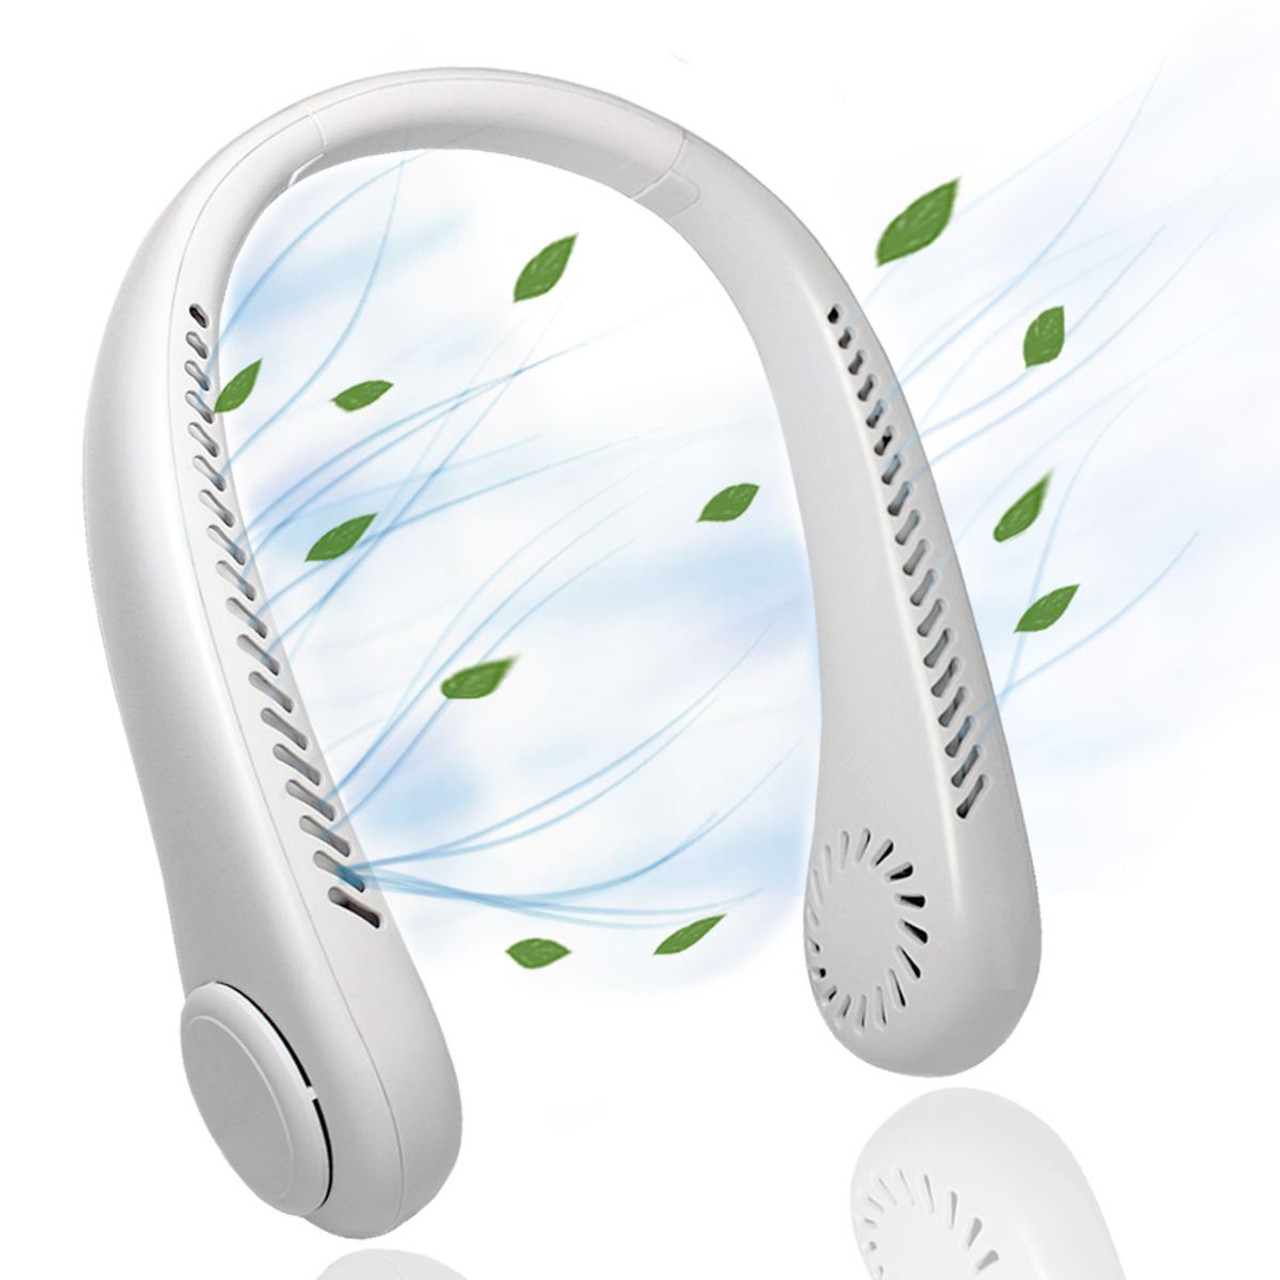 Fenzer 3-Speed Rechargeable Neck Fan  product image